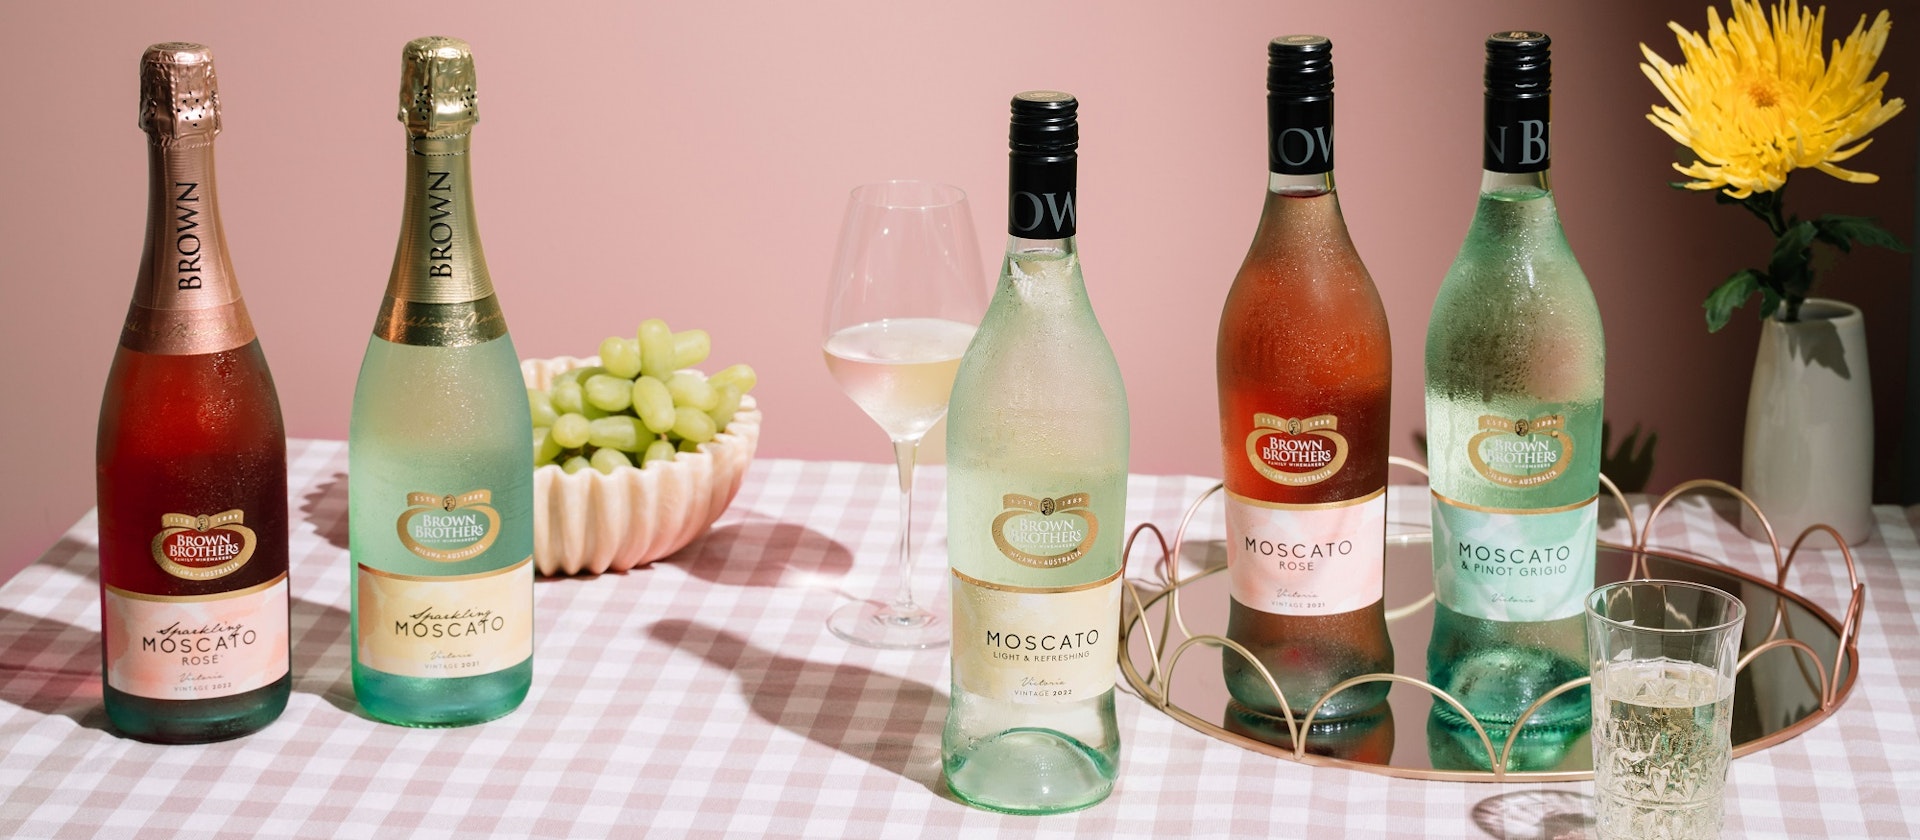 range of Brown Brothers Moscato on a checkered pink tablecloth